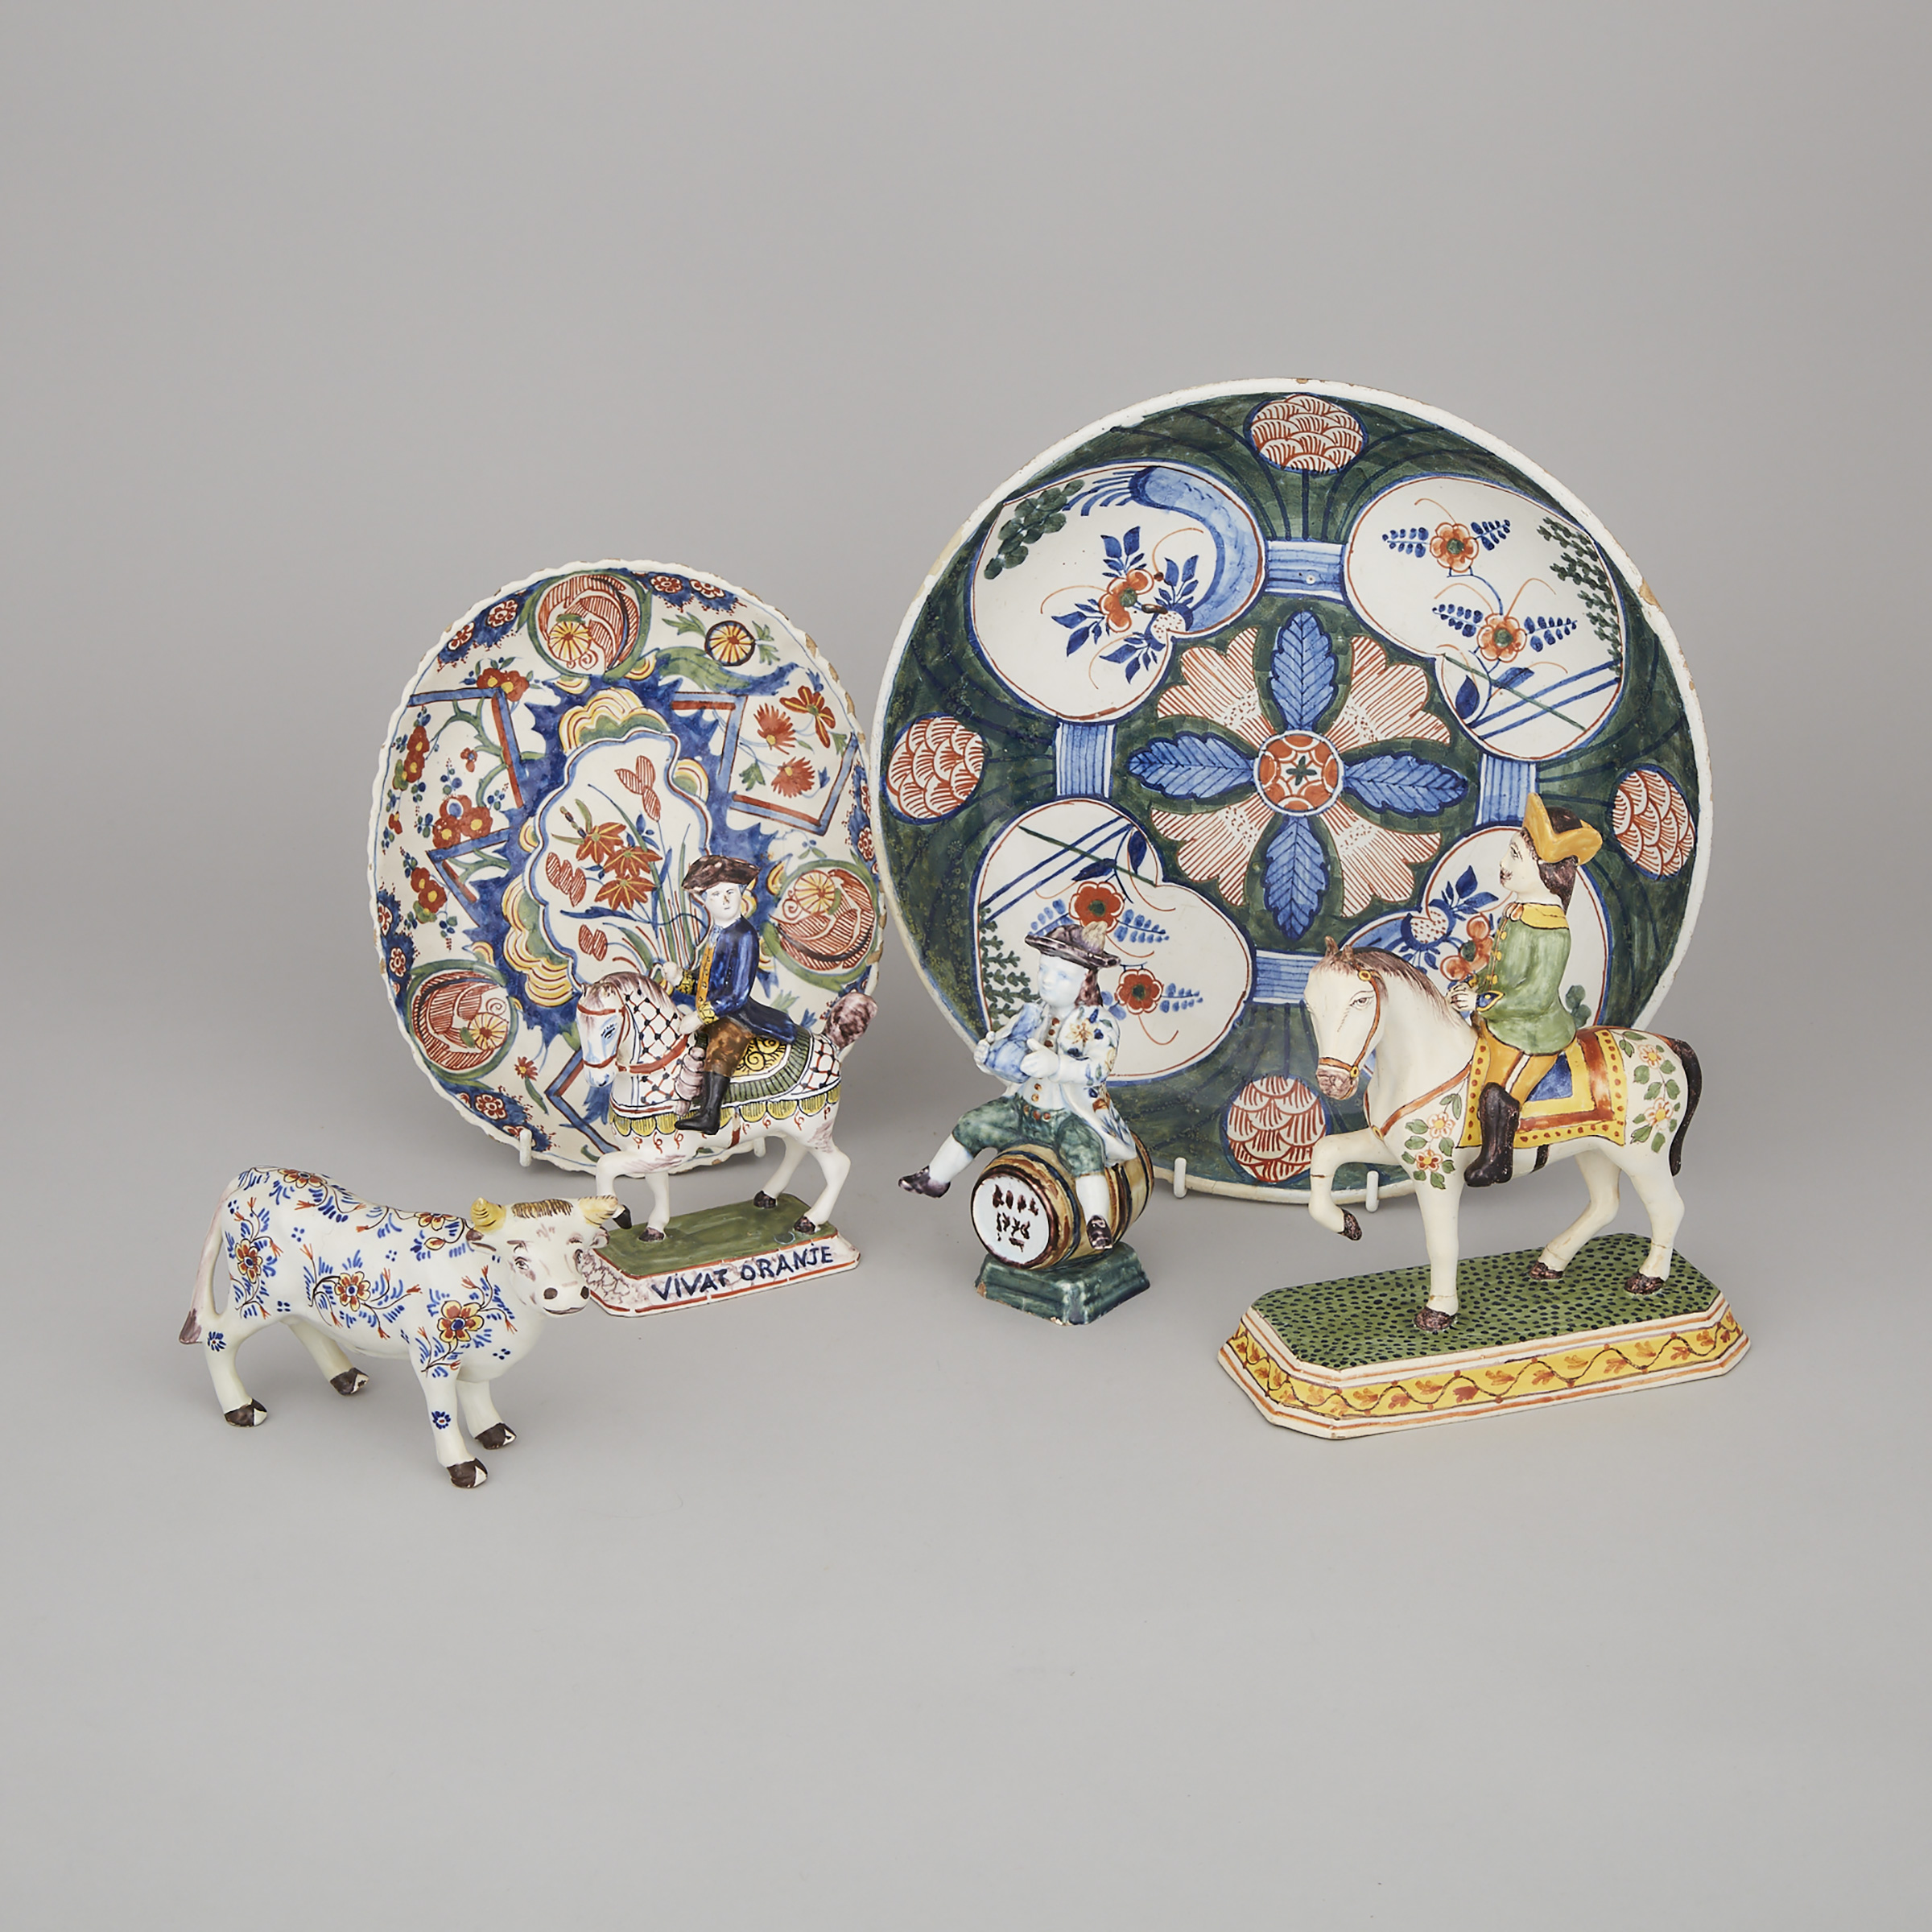 Two Delft Polychrome Dishes, Two Figures on Horseback, Model of a Bull and a Figure Seated Astride a Barrel, 18th/19th century